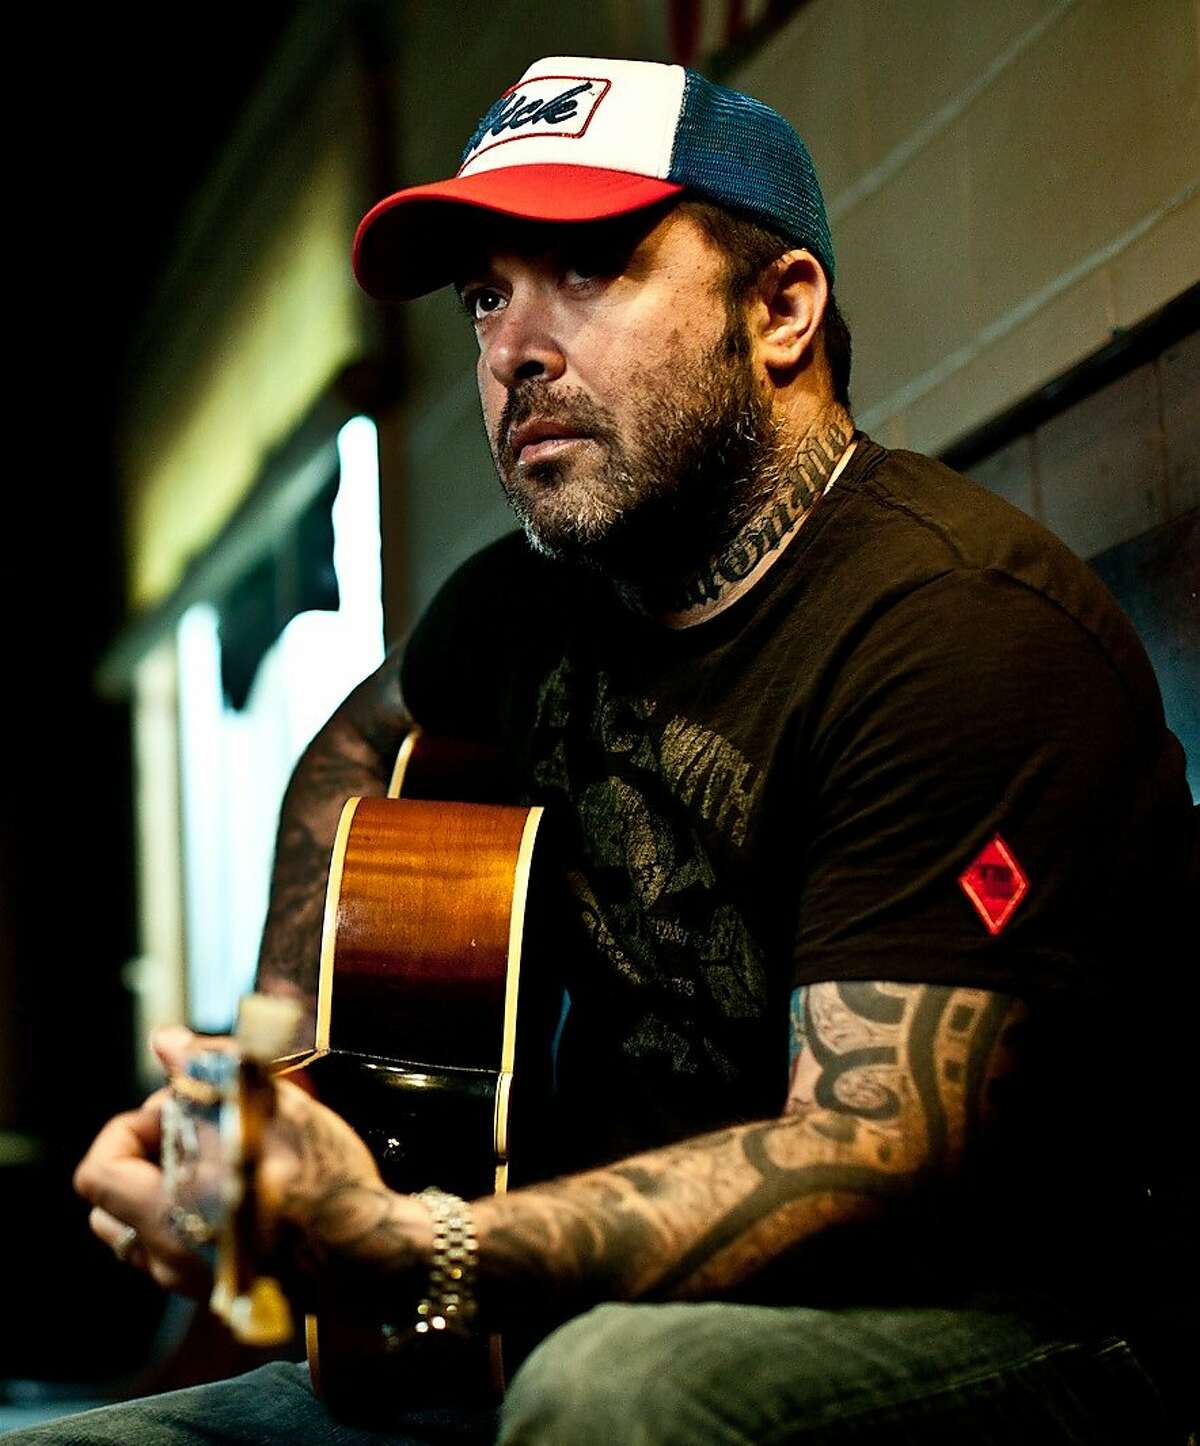 Staind frontman turned country singer Aaron Lewis' show in Pharr came to an abrupt, controversial end over the weekend.